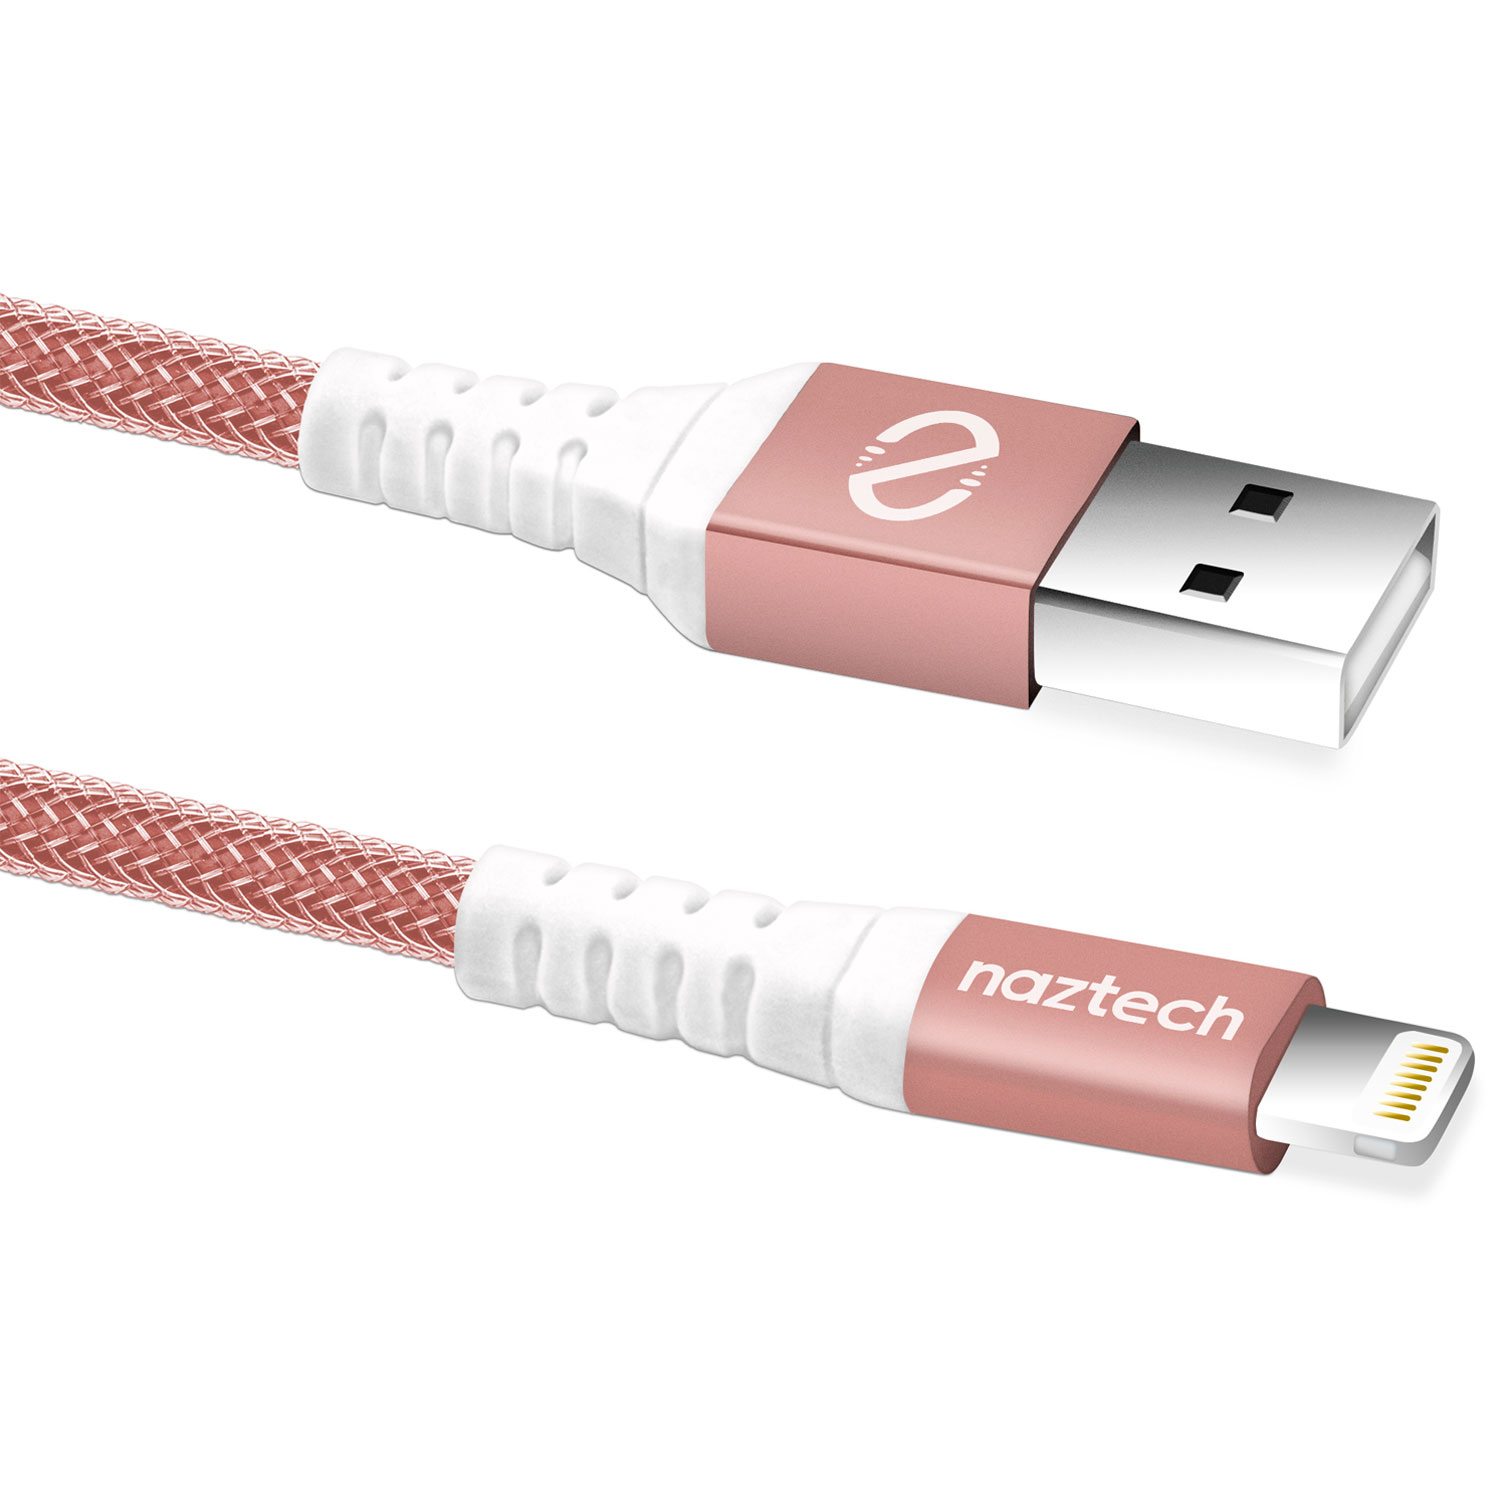 MFi Lightning Braided 4ft. Charge & Sync Cable